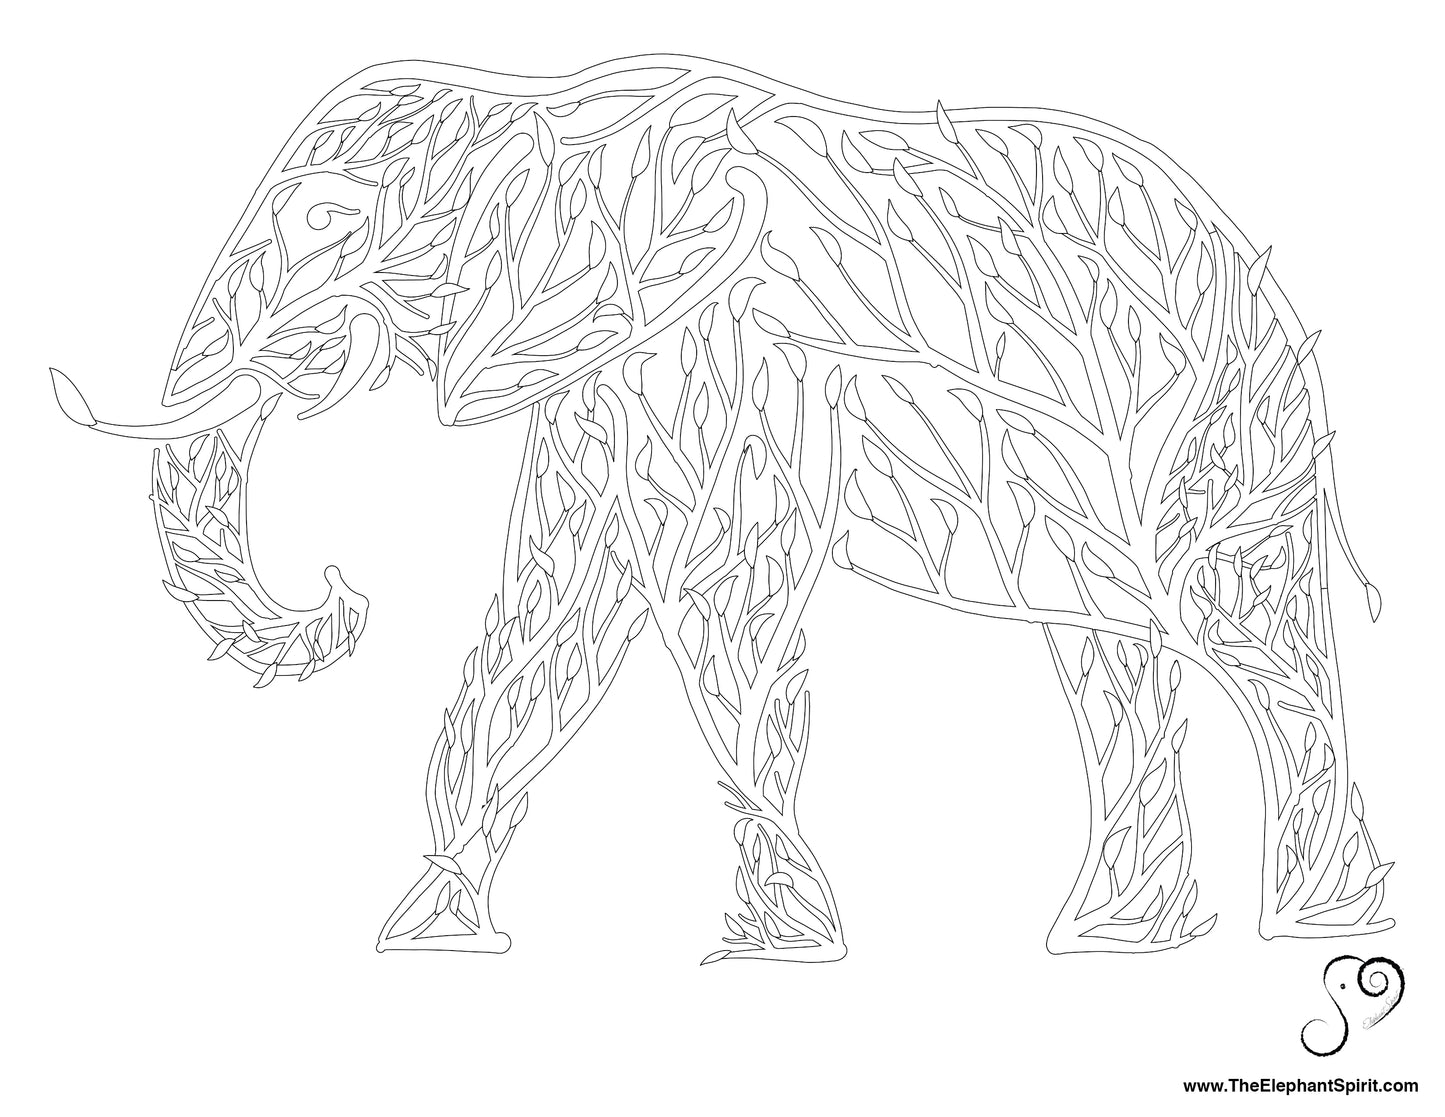 FREE Coloring Page 07-21